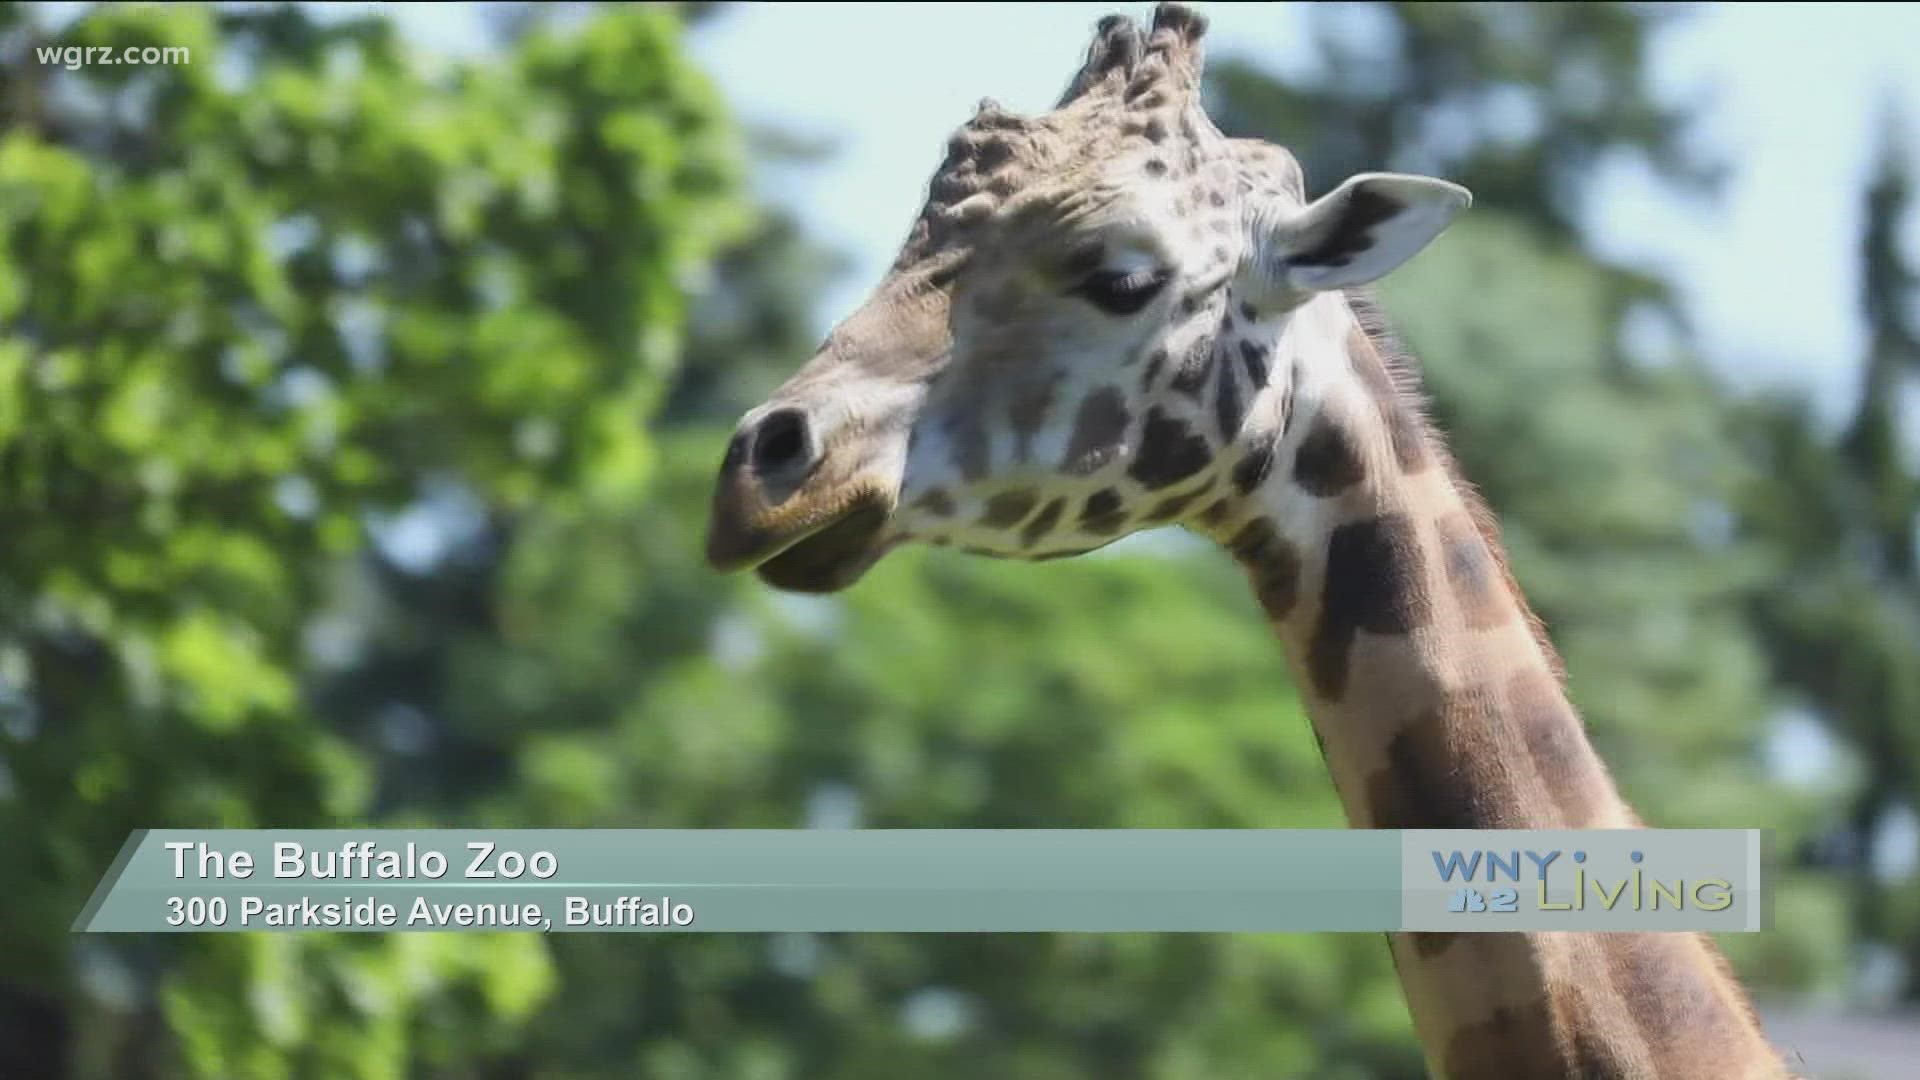 WNY Living - September 18 - The Buffalo Zoo (THIS VIDEO IS SPONSORED BY THE BUFFALO ZOO